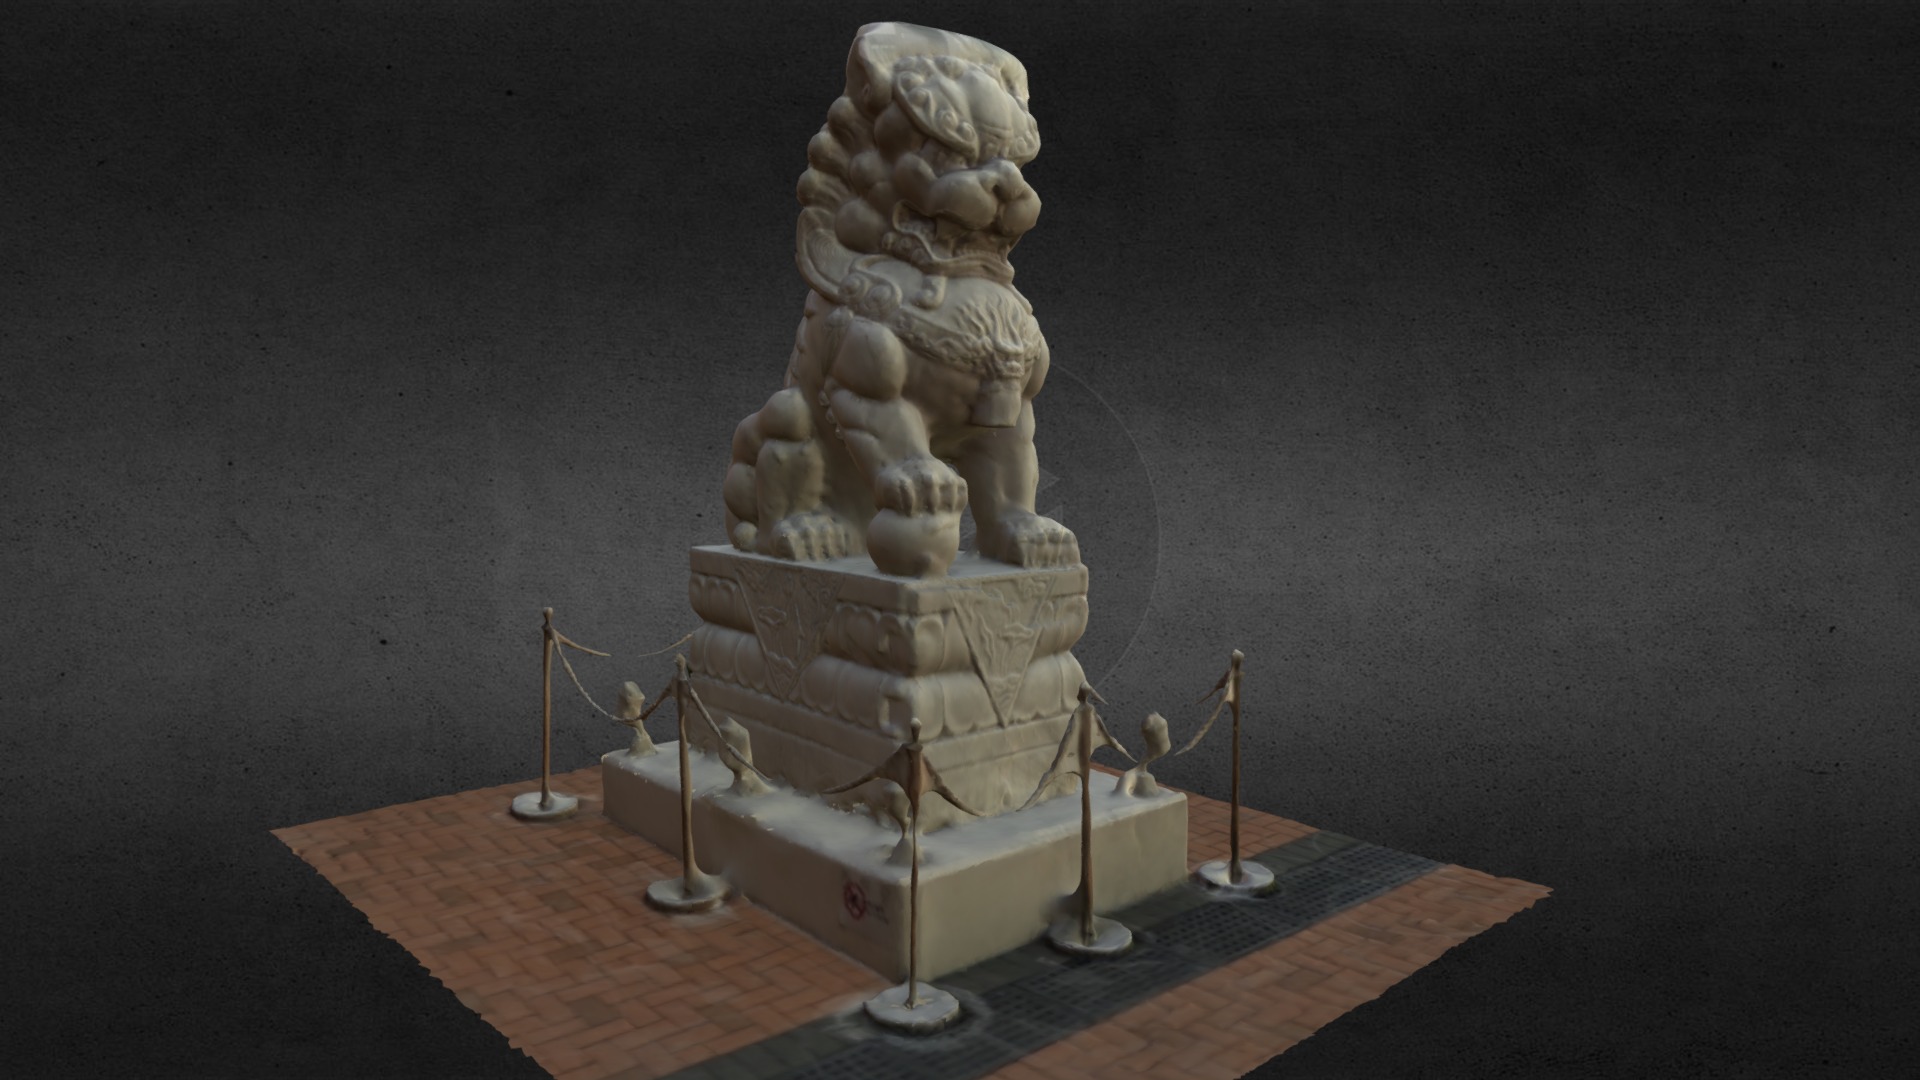 3D model Central Wheel – Chinese Lion - This is a 3D model of the Central Wheel - Chinese Lion. The 3D model is about a statue of a person with a beard and mustache.